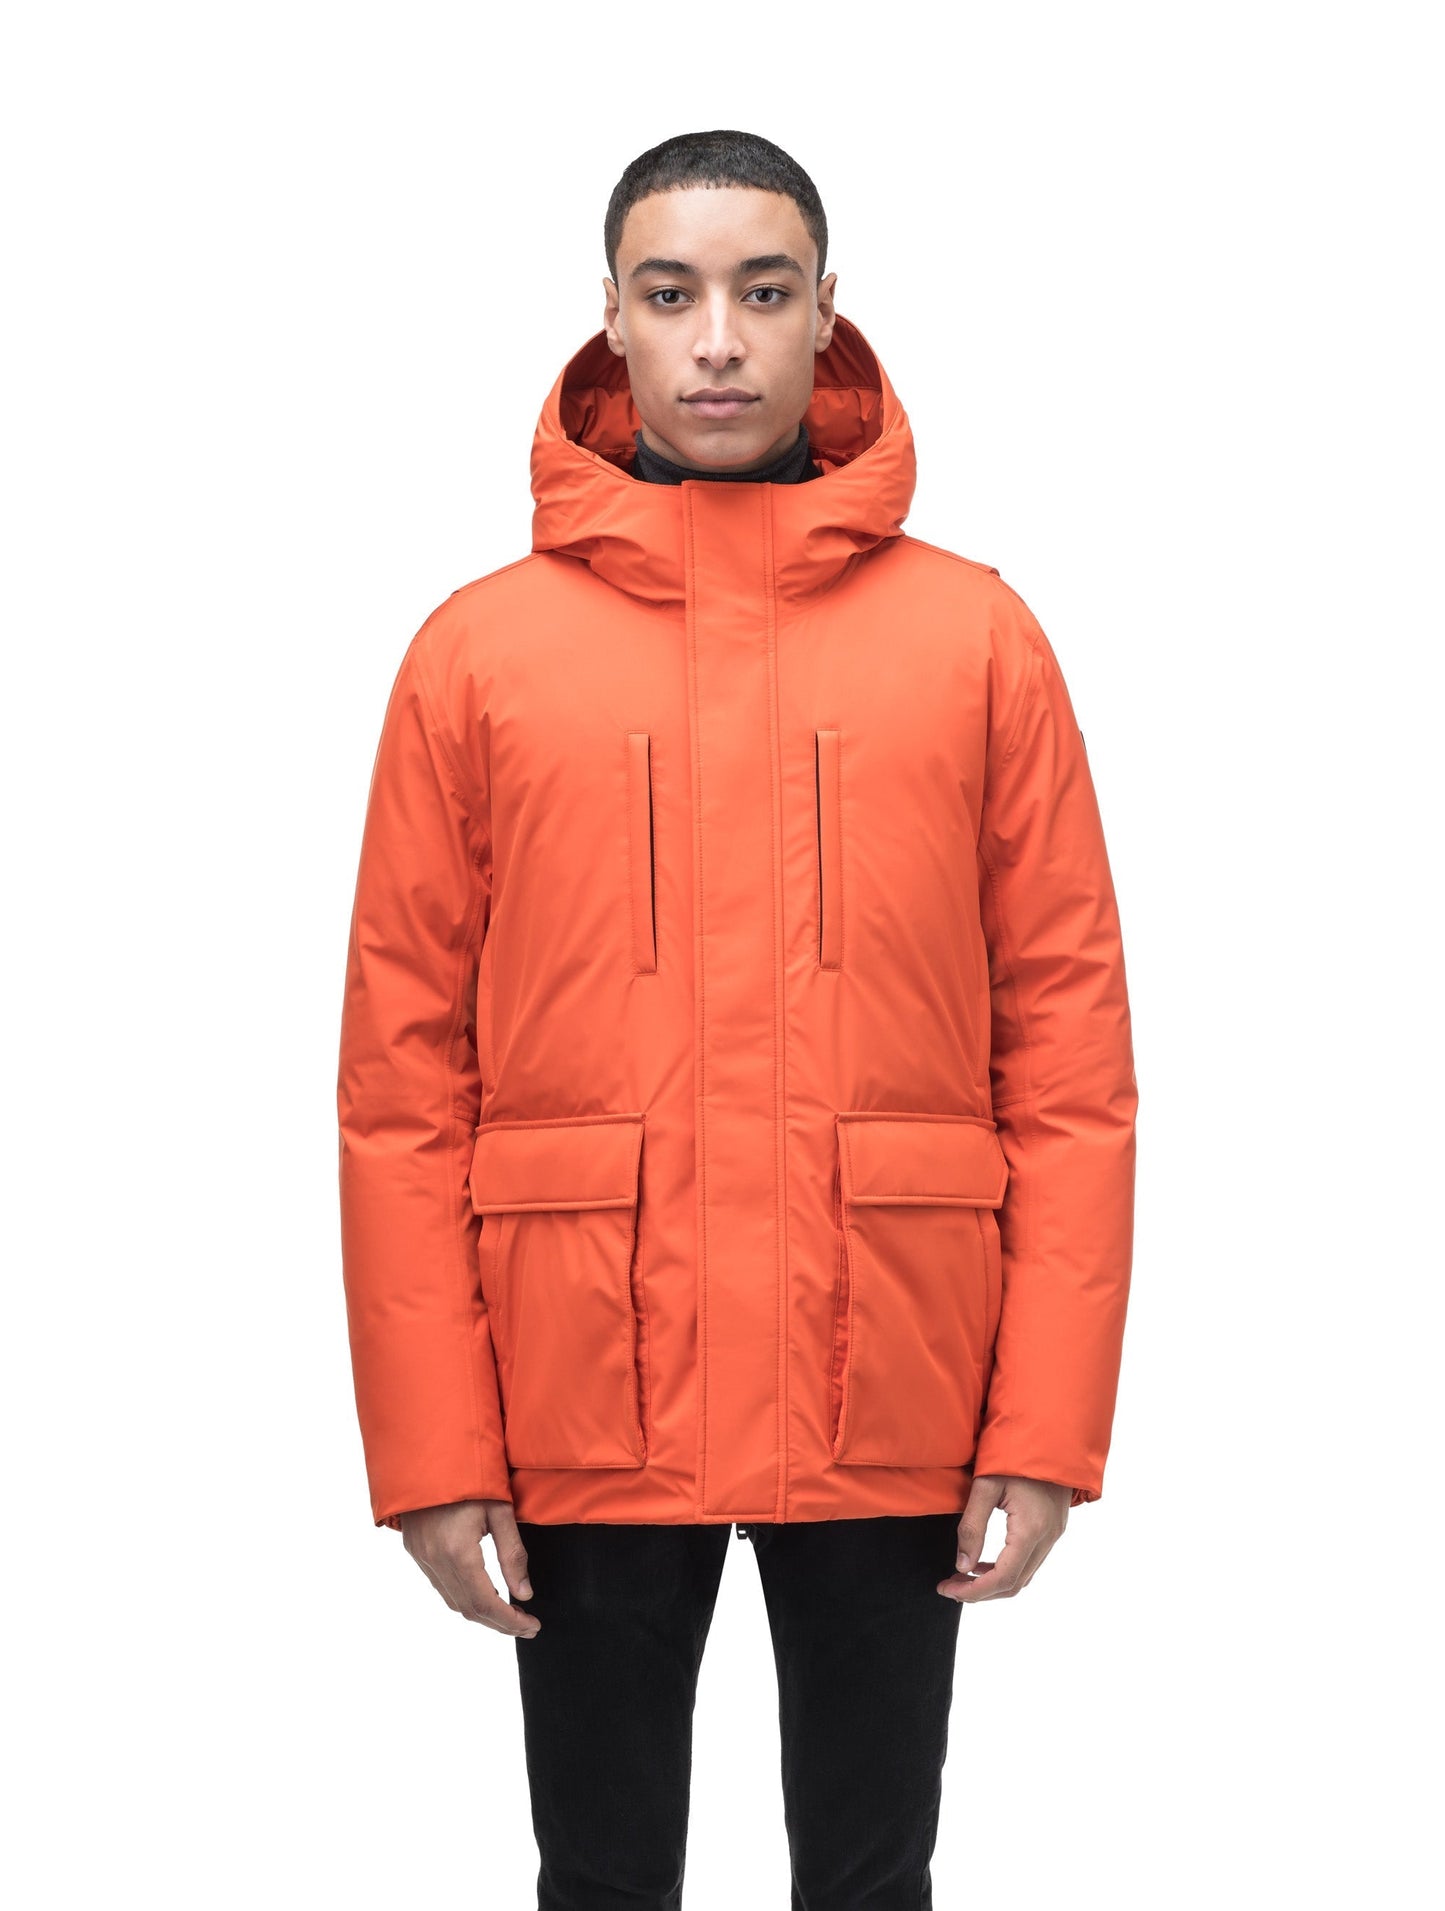 Geo Men's Short Parka in hip length, Canadian duck down insulation, non-removable hood, and two-way zipper, in Terracotta